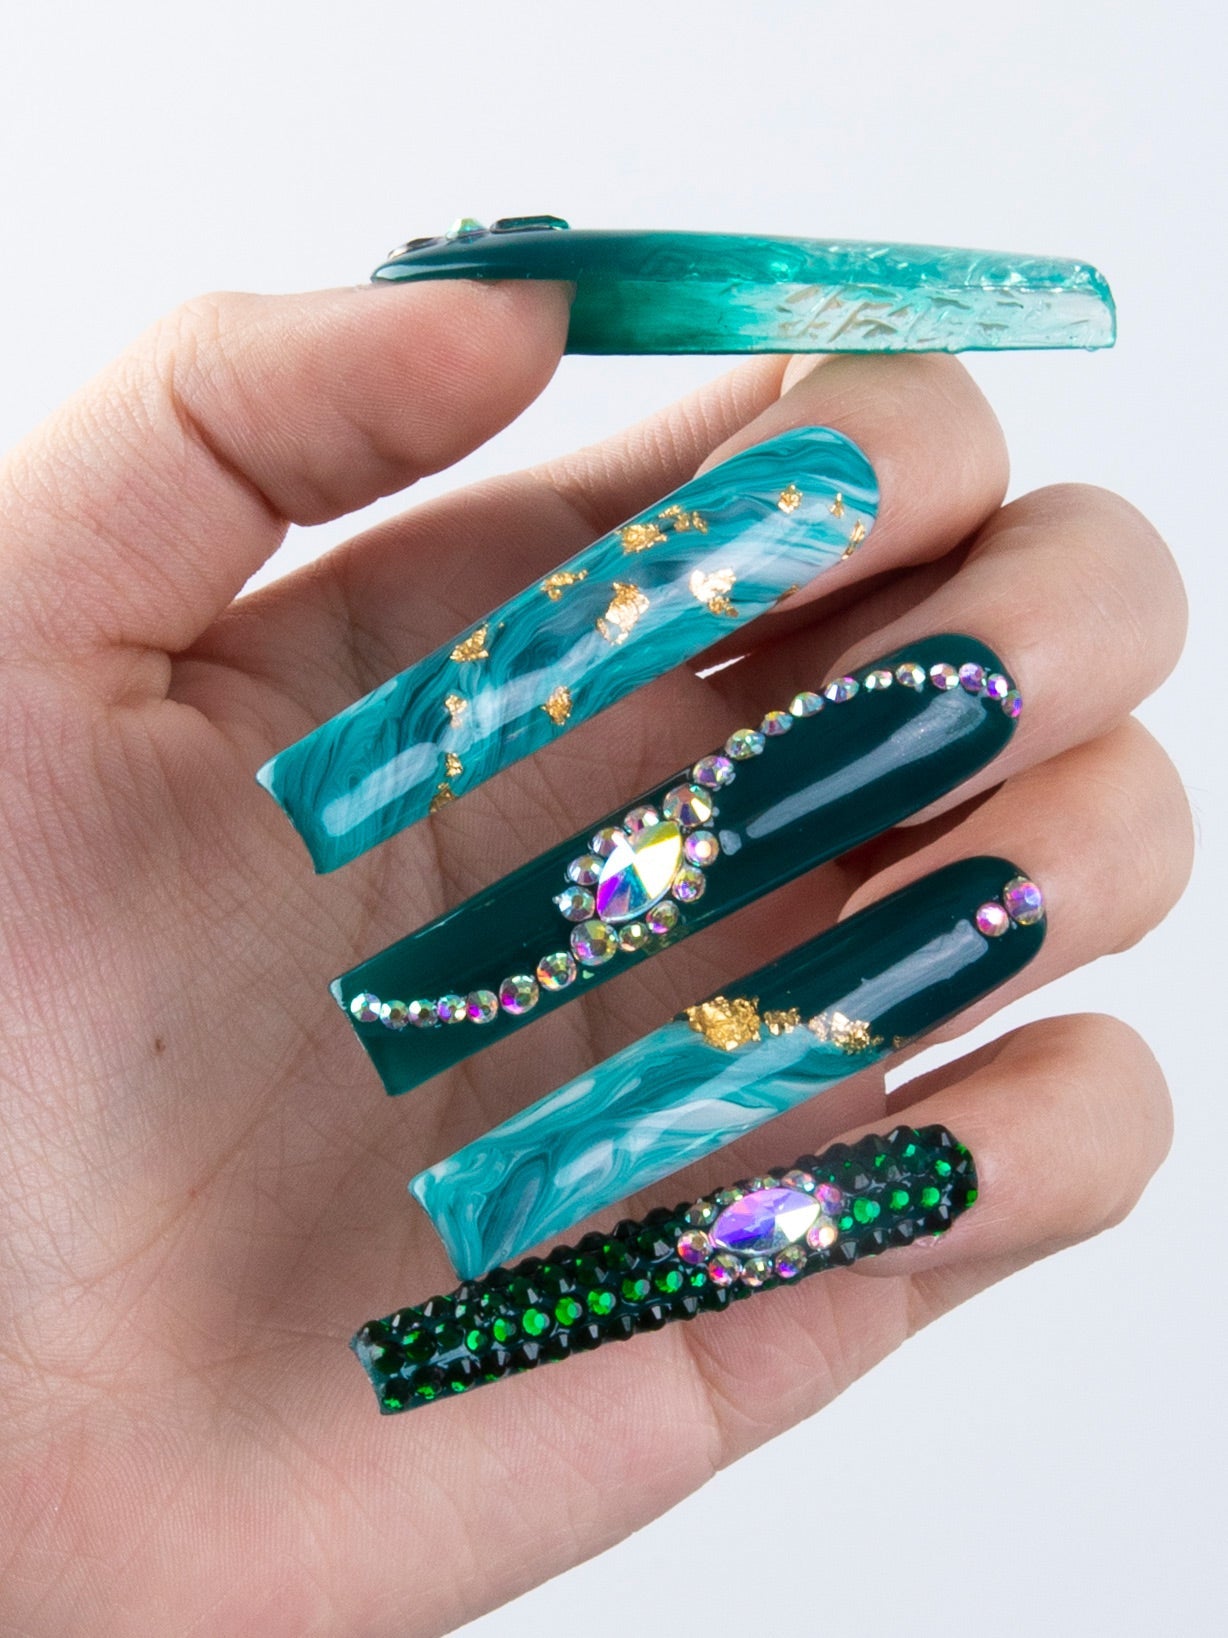 Hand displaying Lovful's 'Emerald Envy' press-on acrylic nails with green hues, gold foil accents, liquid flowing designs, and emerald green rhinestone embellishments.